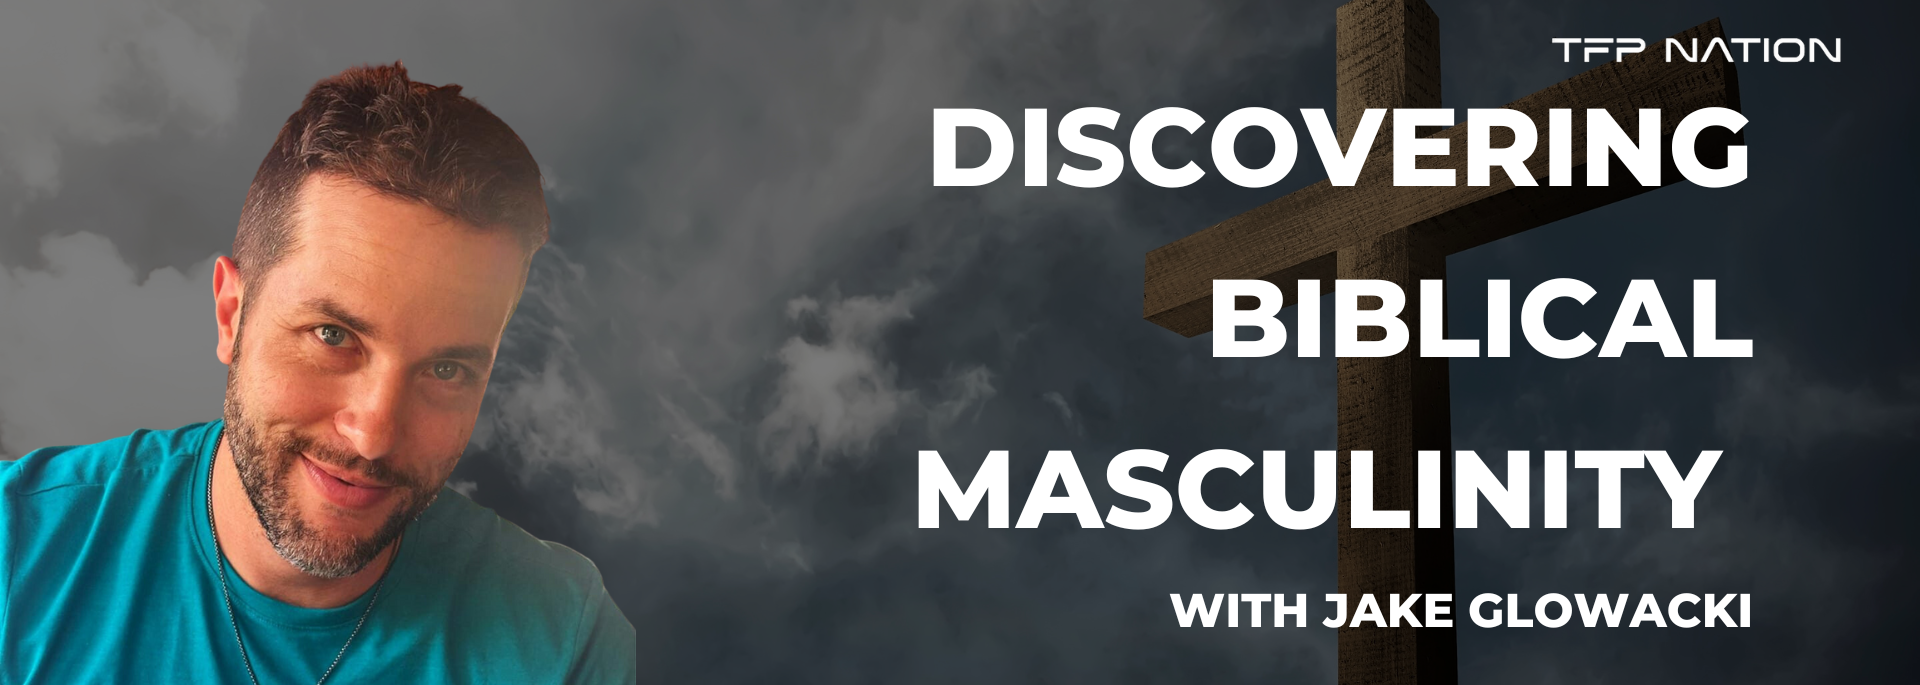 Discovering Biblical Masculinity channel